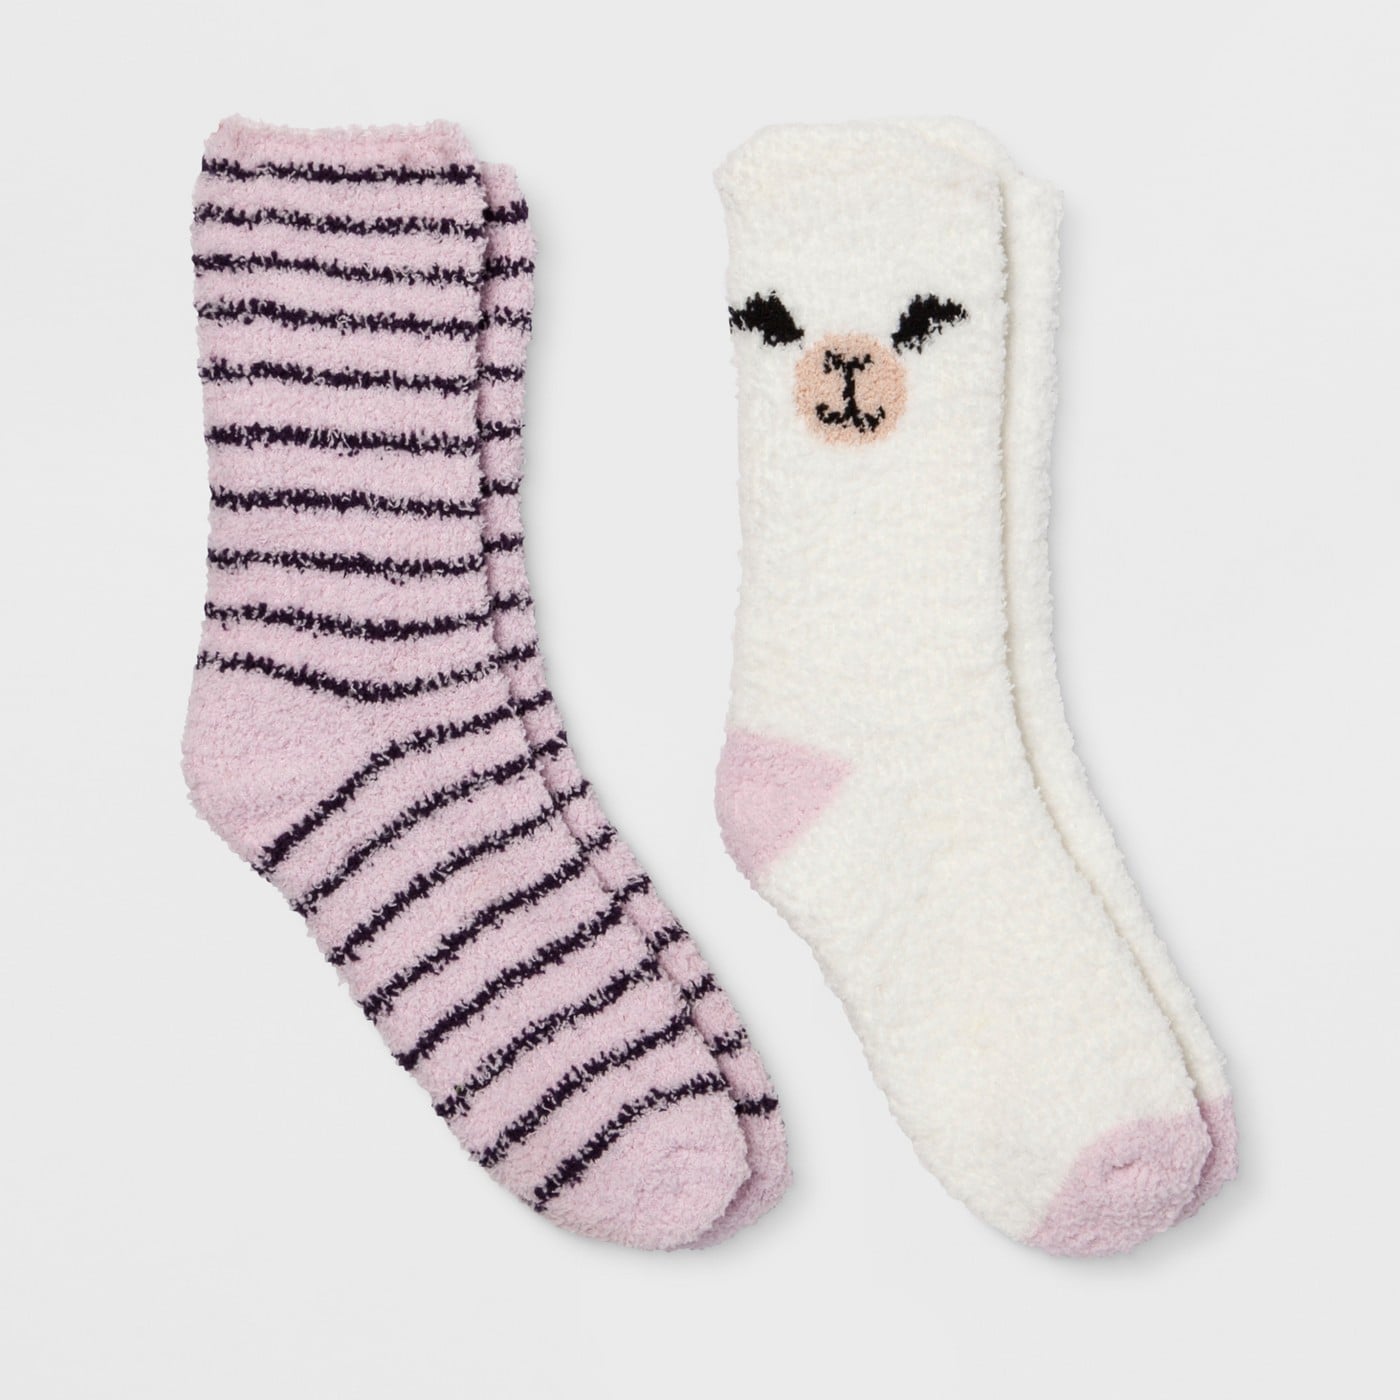 Llama Cosy Crew 2pk Casual Socks  Target Is Selling So Much Cosy